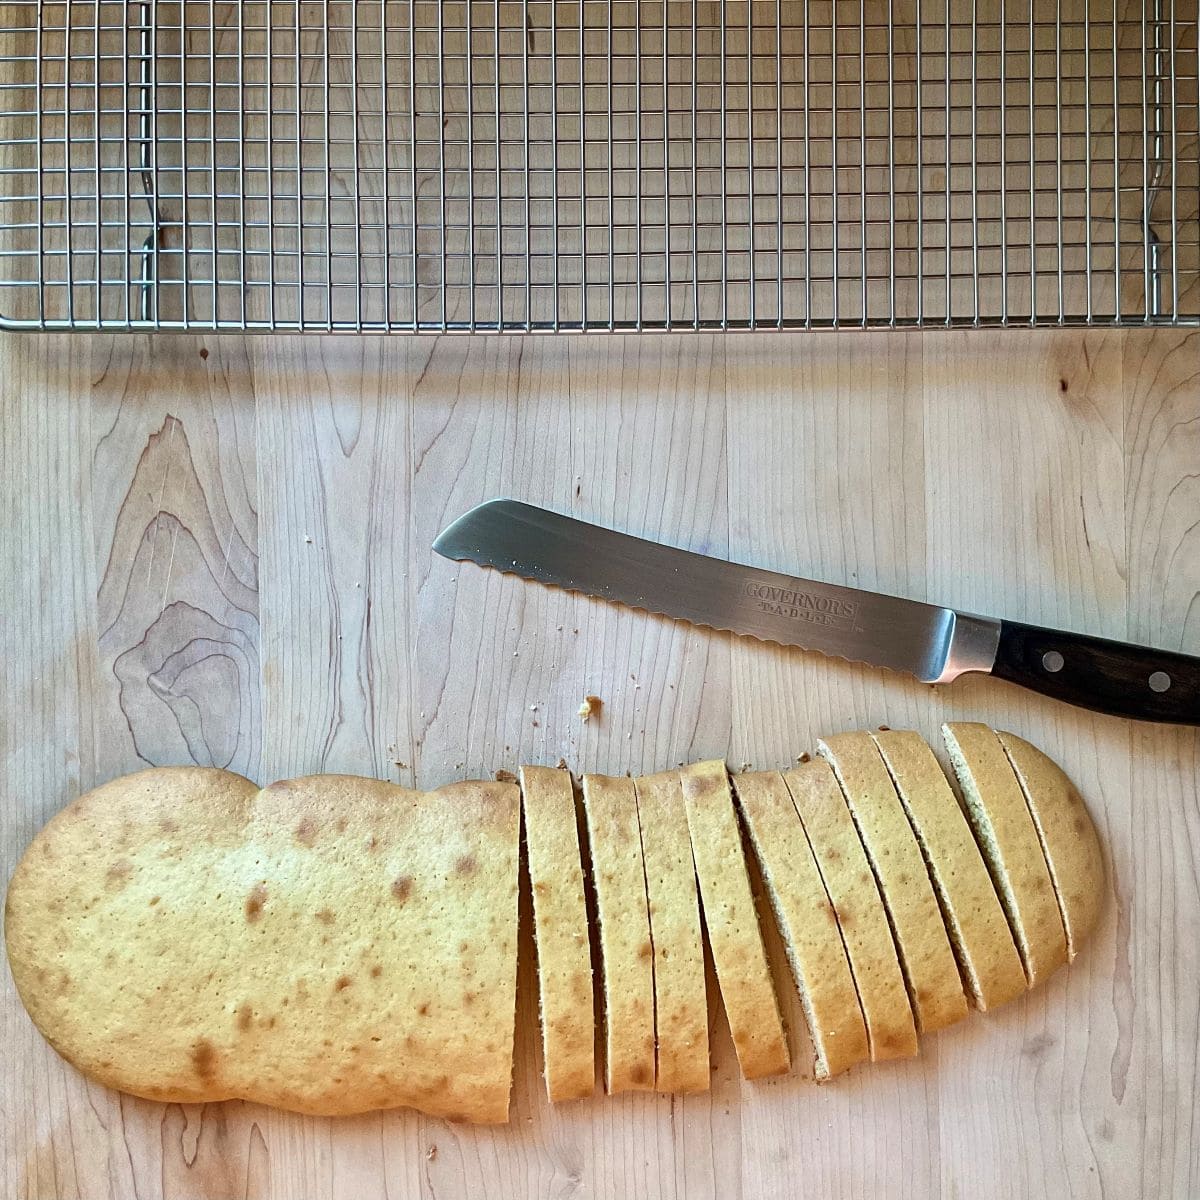 Sliced Italian cookies on a wooden board next to a cooling rack.